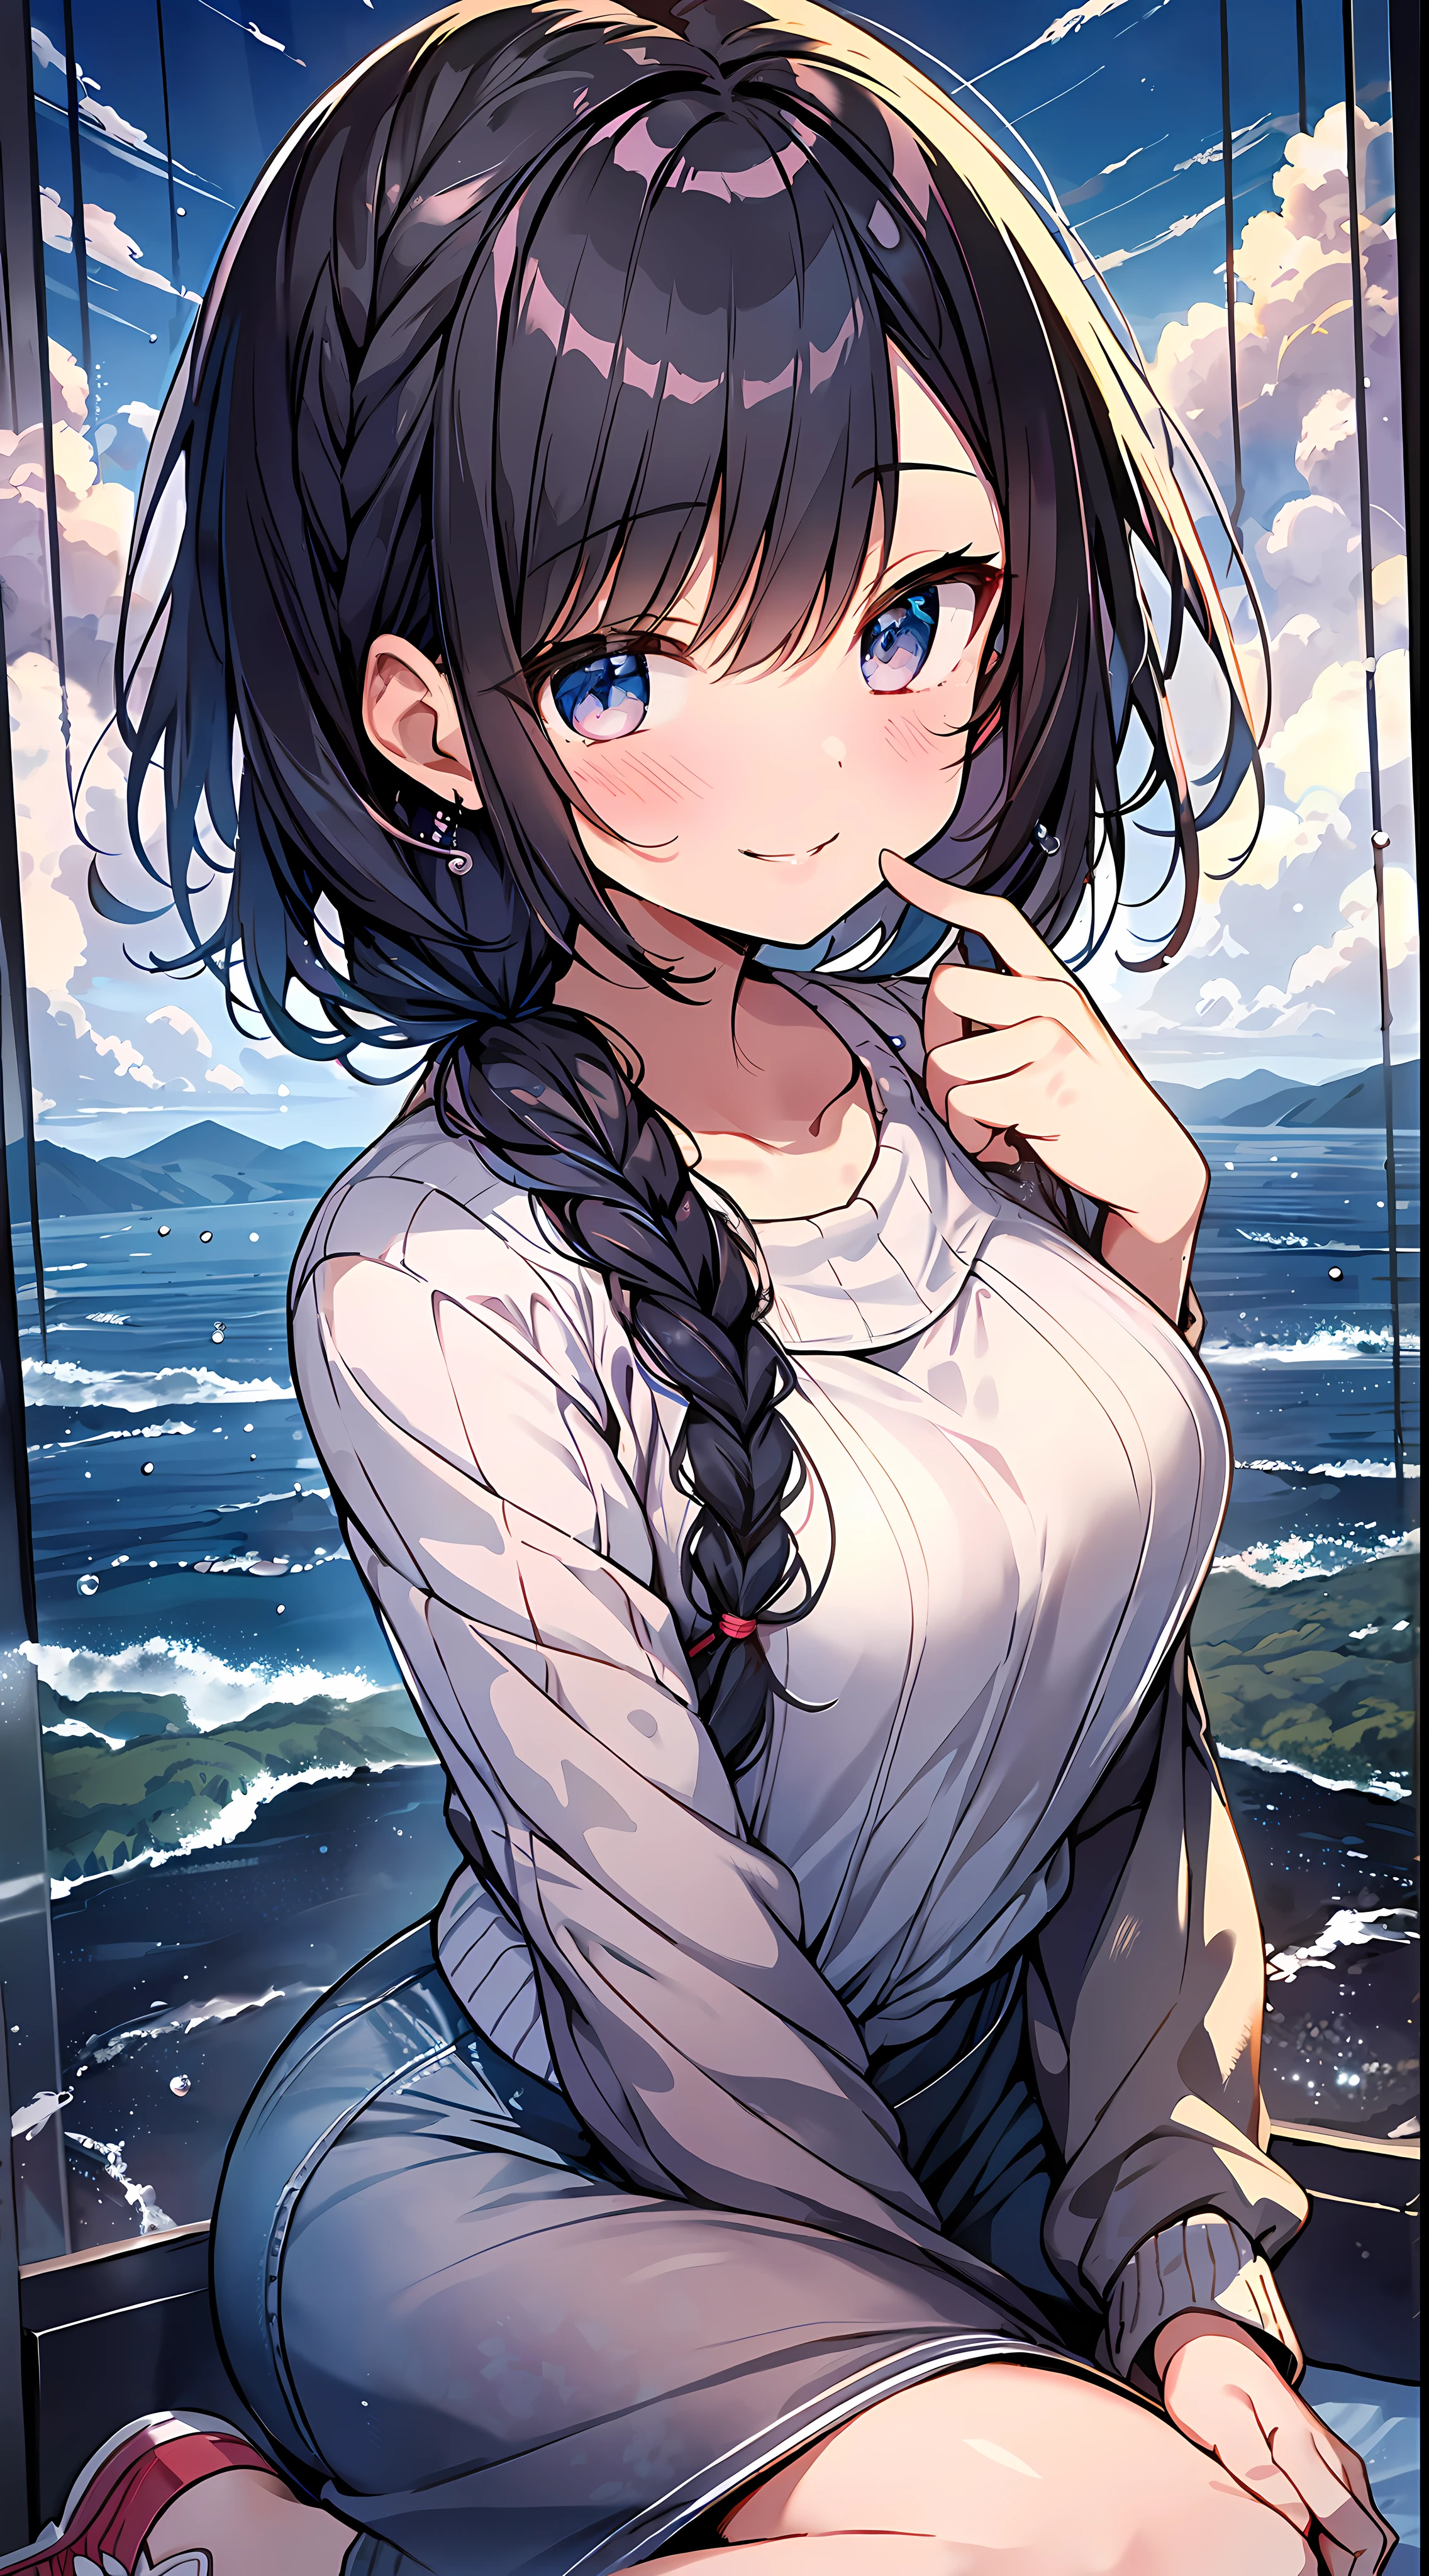 Top Quality, Masterpiece, Ultra High Definition, 8K, Summer Sky, Early Summer, (Shorts, Light Knitwear, Sneakers), Shojo Manga Style , One, Soft Line Art, Digital Enhancement, Shojo Manga Touch, Shoujo Manga Core, Flowing Fabric, Close Up, (Hair length and short braid to the shoulders)), Wet Hair, Staring at us from the front, Soft drawing, Beautiful Black Hair, Clear eyes, ((teasing smile)), ultra-detailed digital anime art, clear face depiction, ultra-detailed shojo manga character art, clear facial features, ultra-detailed manga style, top quality colors, hand gestures, landscape with nature, looking up at the sky, angle that can see up to your feet, sit